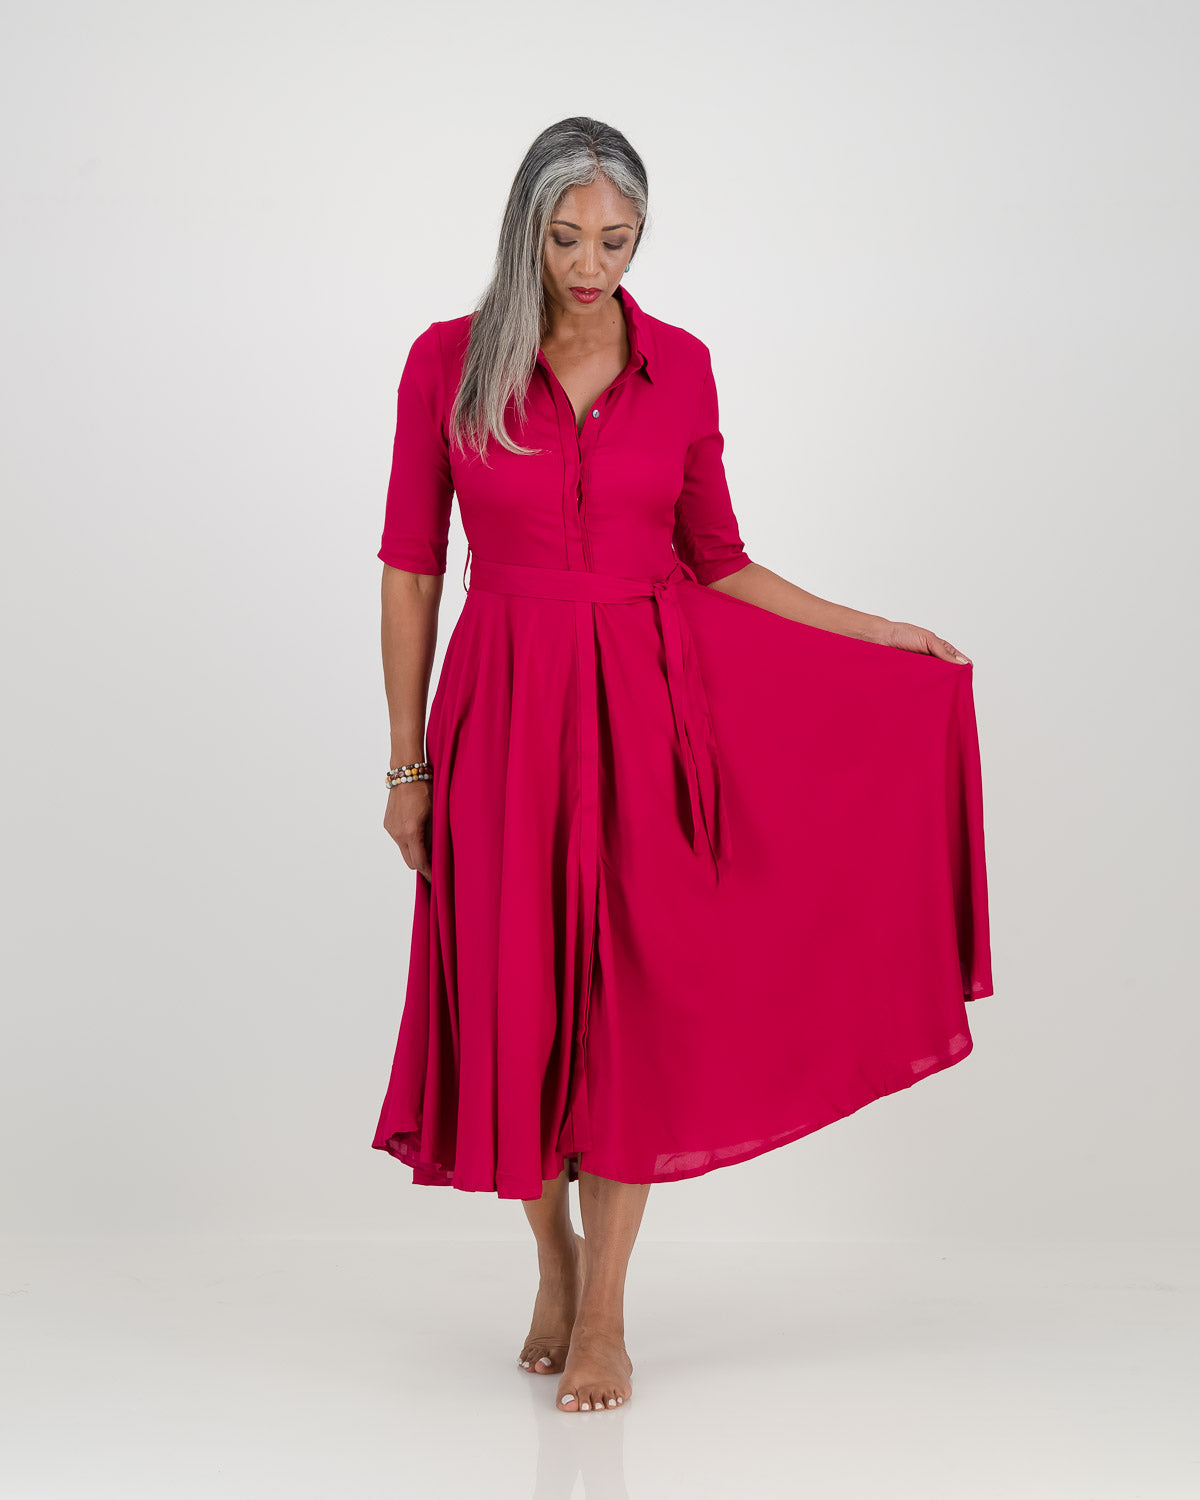 Woman wearing chic cerise Abigail dress with 3/4 sleeves, collar, and belt at waist. Features full skirt, concealed buttons, and pockets. Elegant and versatile.